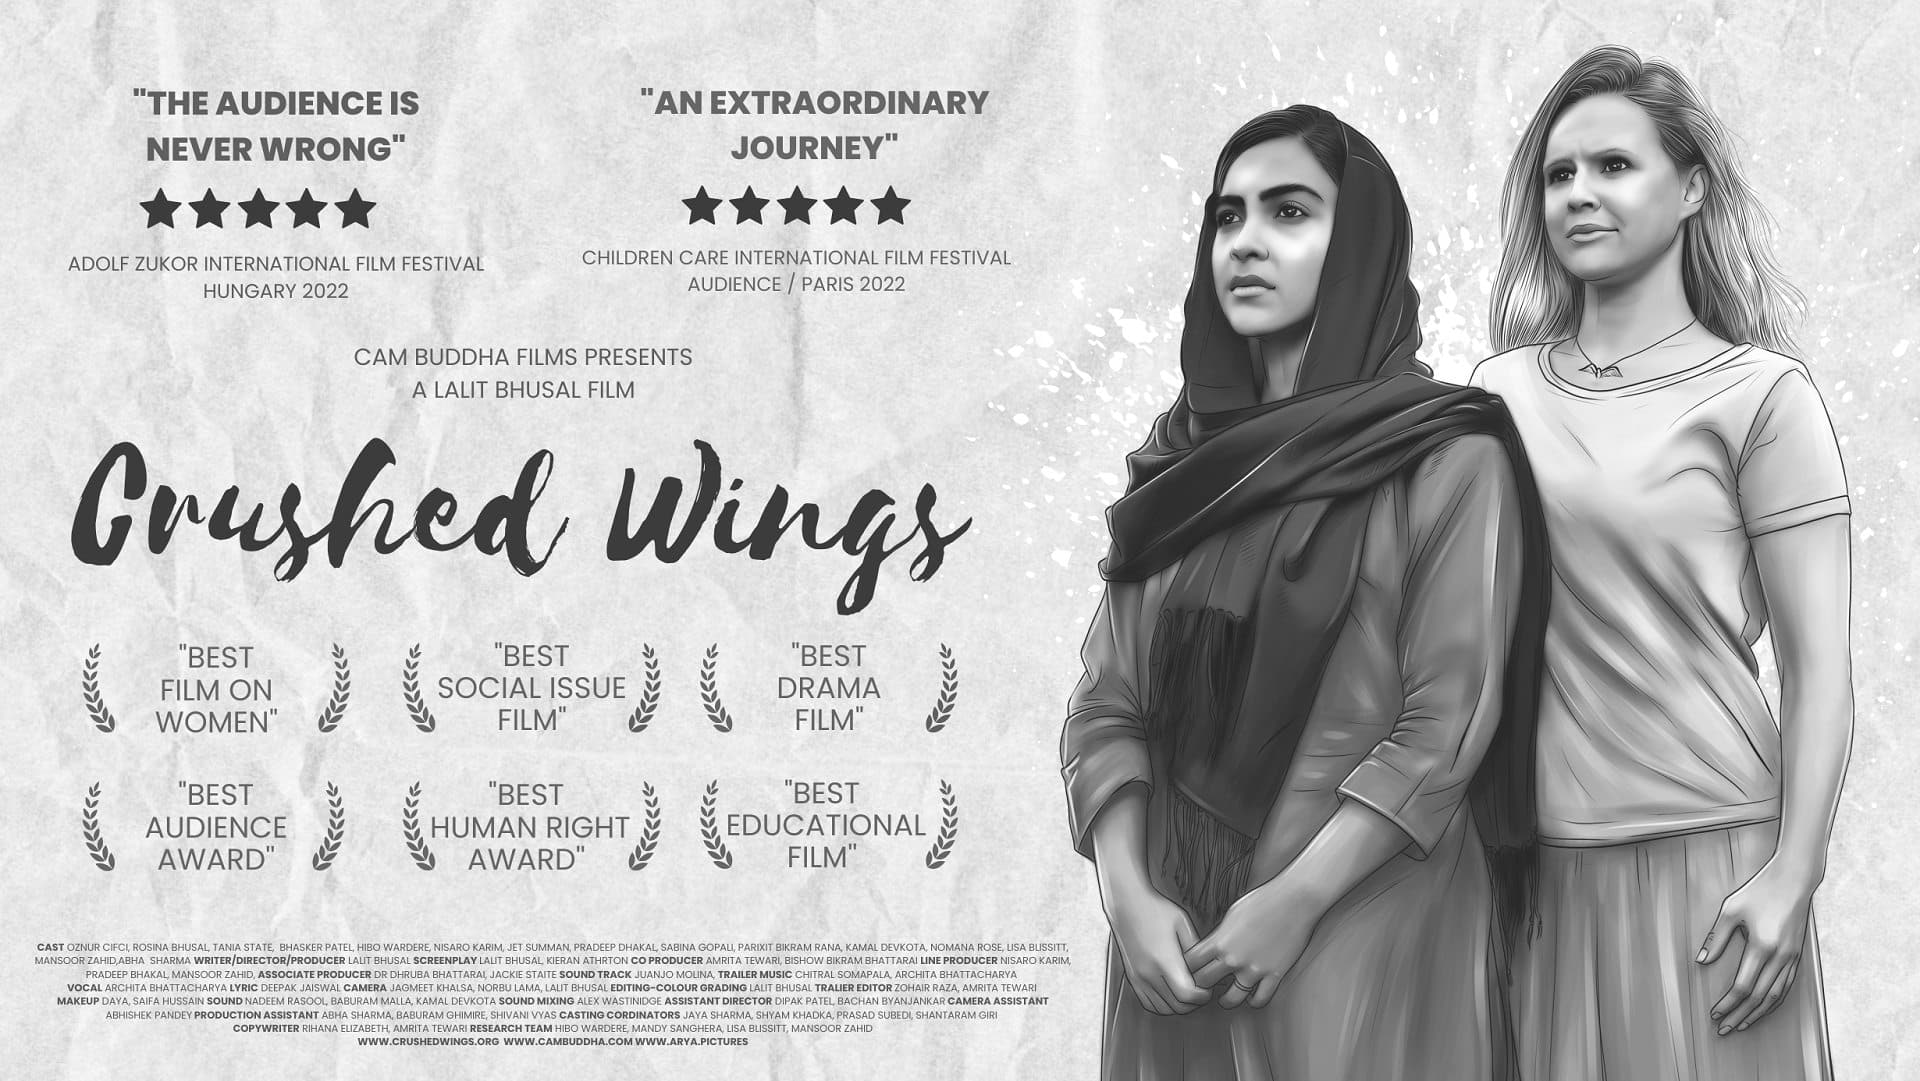 Crushed Wings - A Film On FGM | Art House Cinema